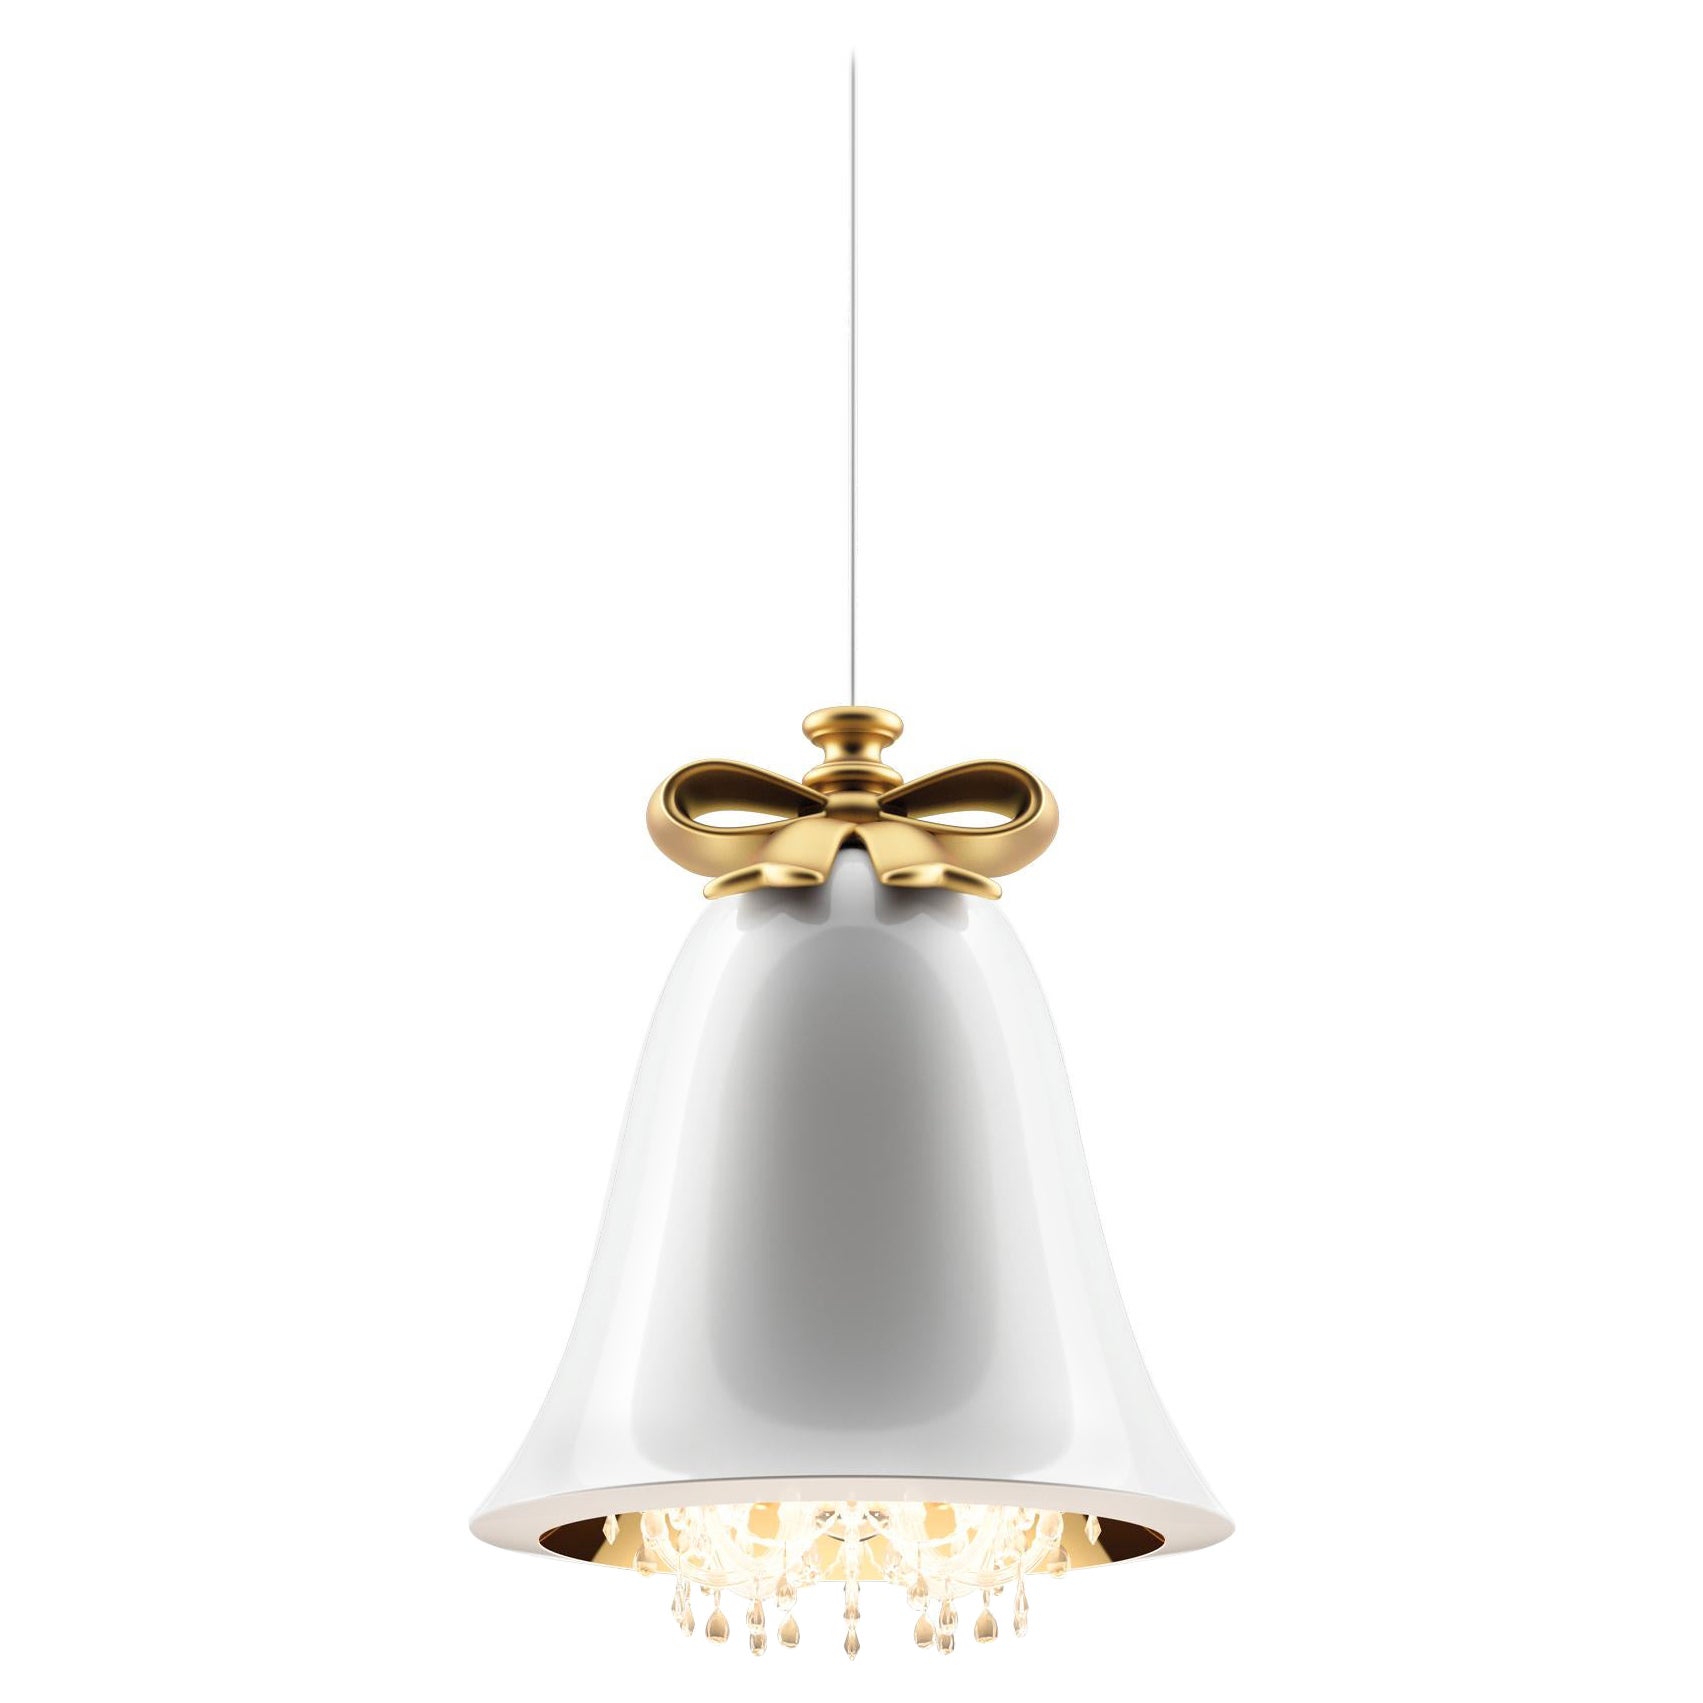 White Mabelle Chandelier, Designed by Marcel Wanders Studio, Made in Italy